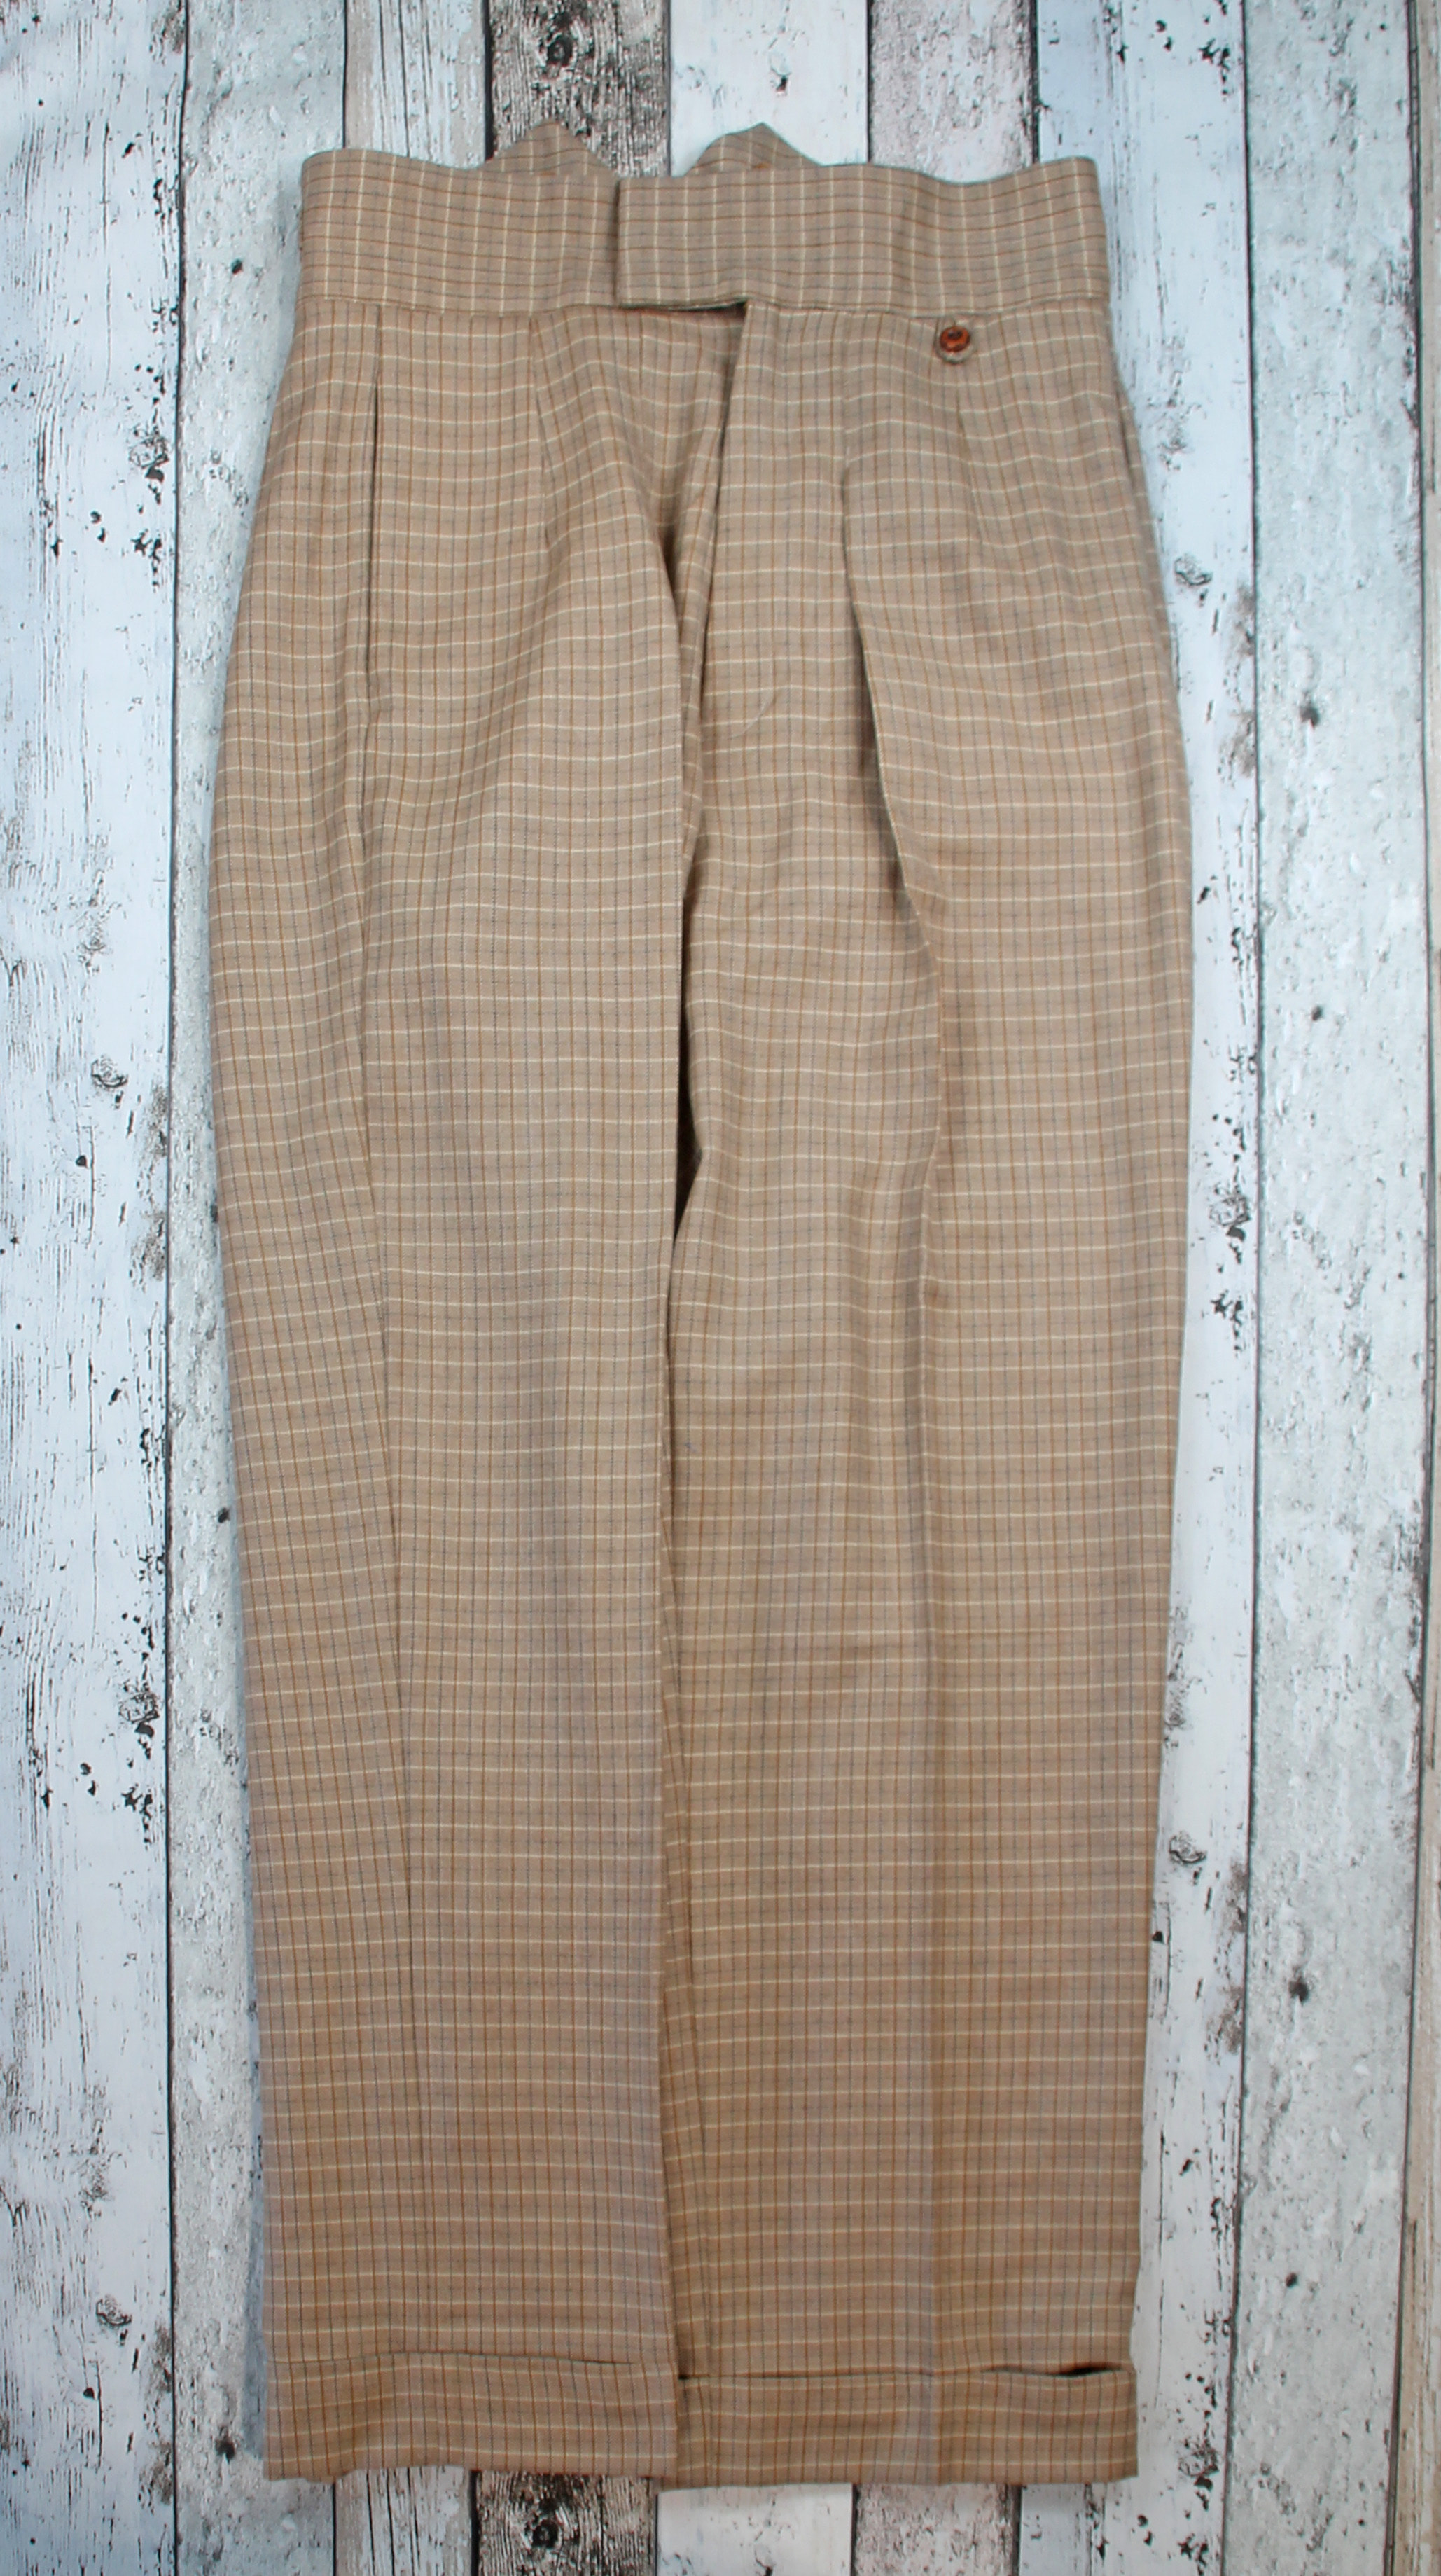 1930s 1940s Mens Vintage Style Rib Cords High Waisted Trousers